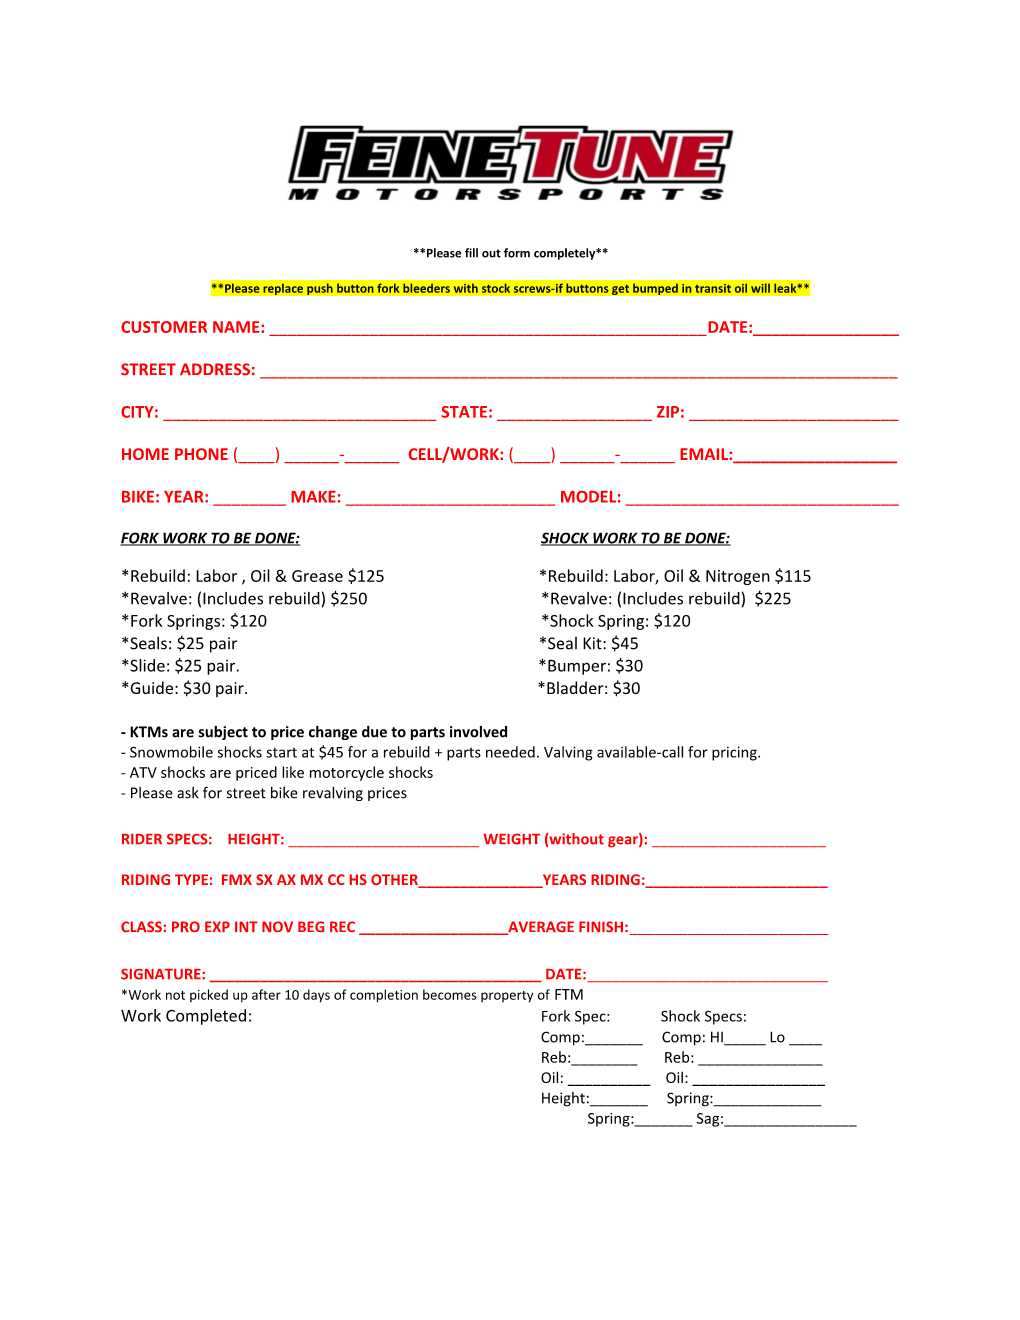 Please Fill out Form Completely